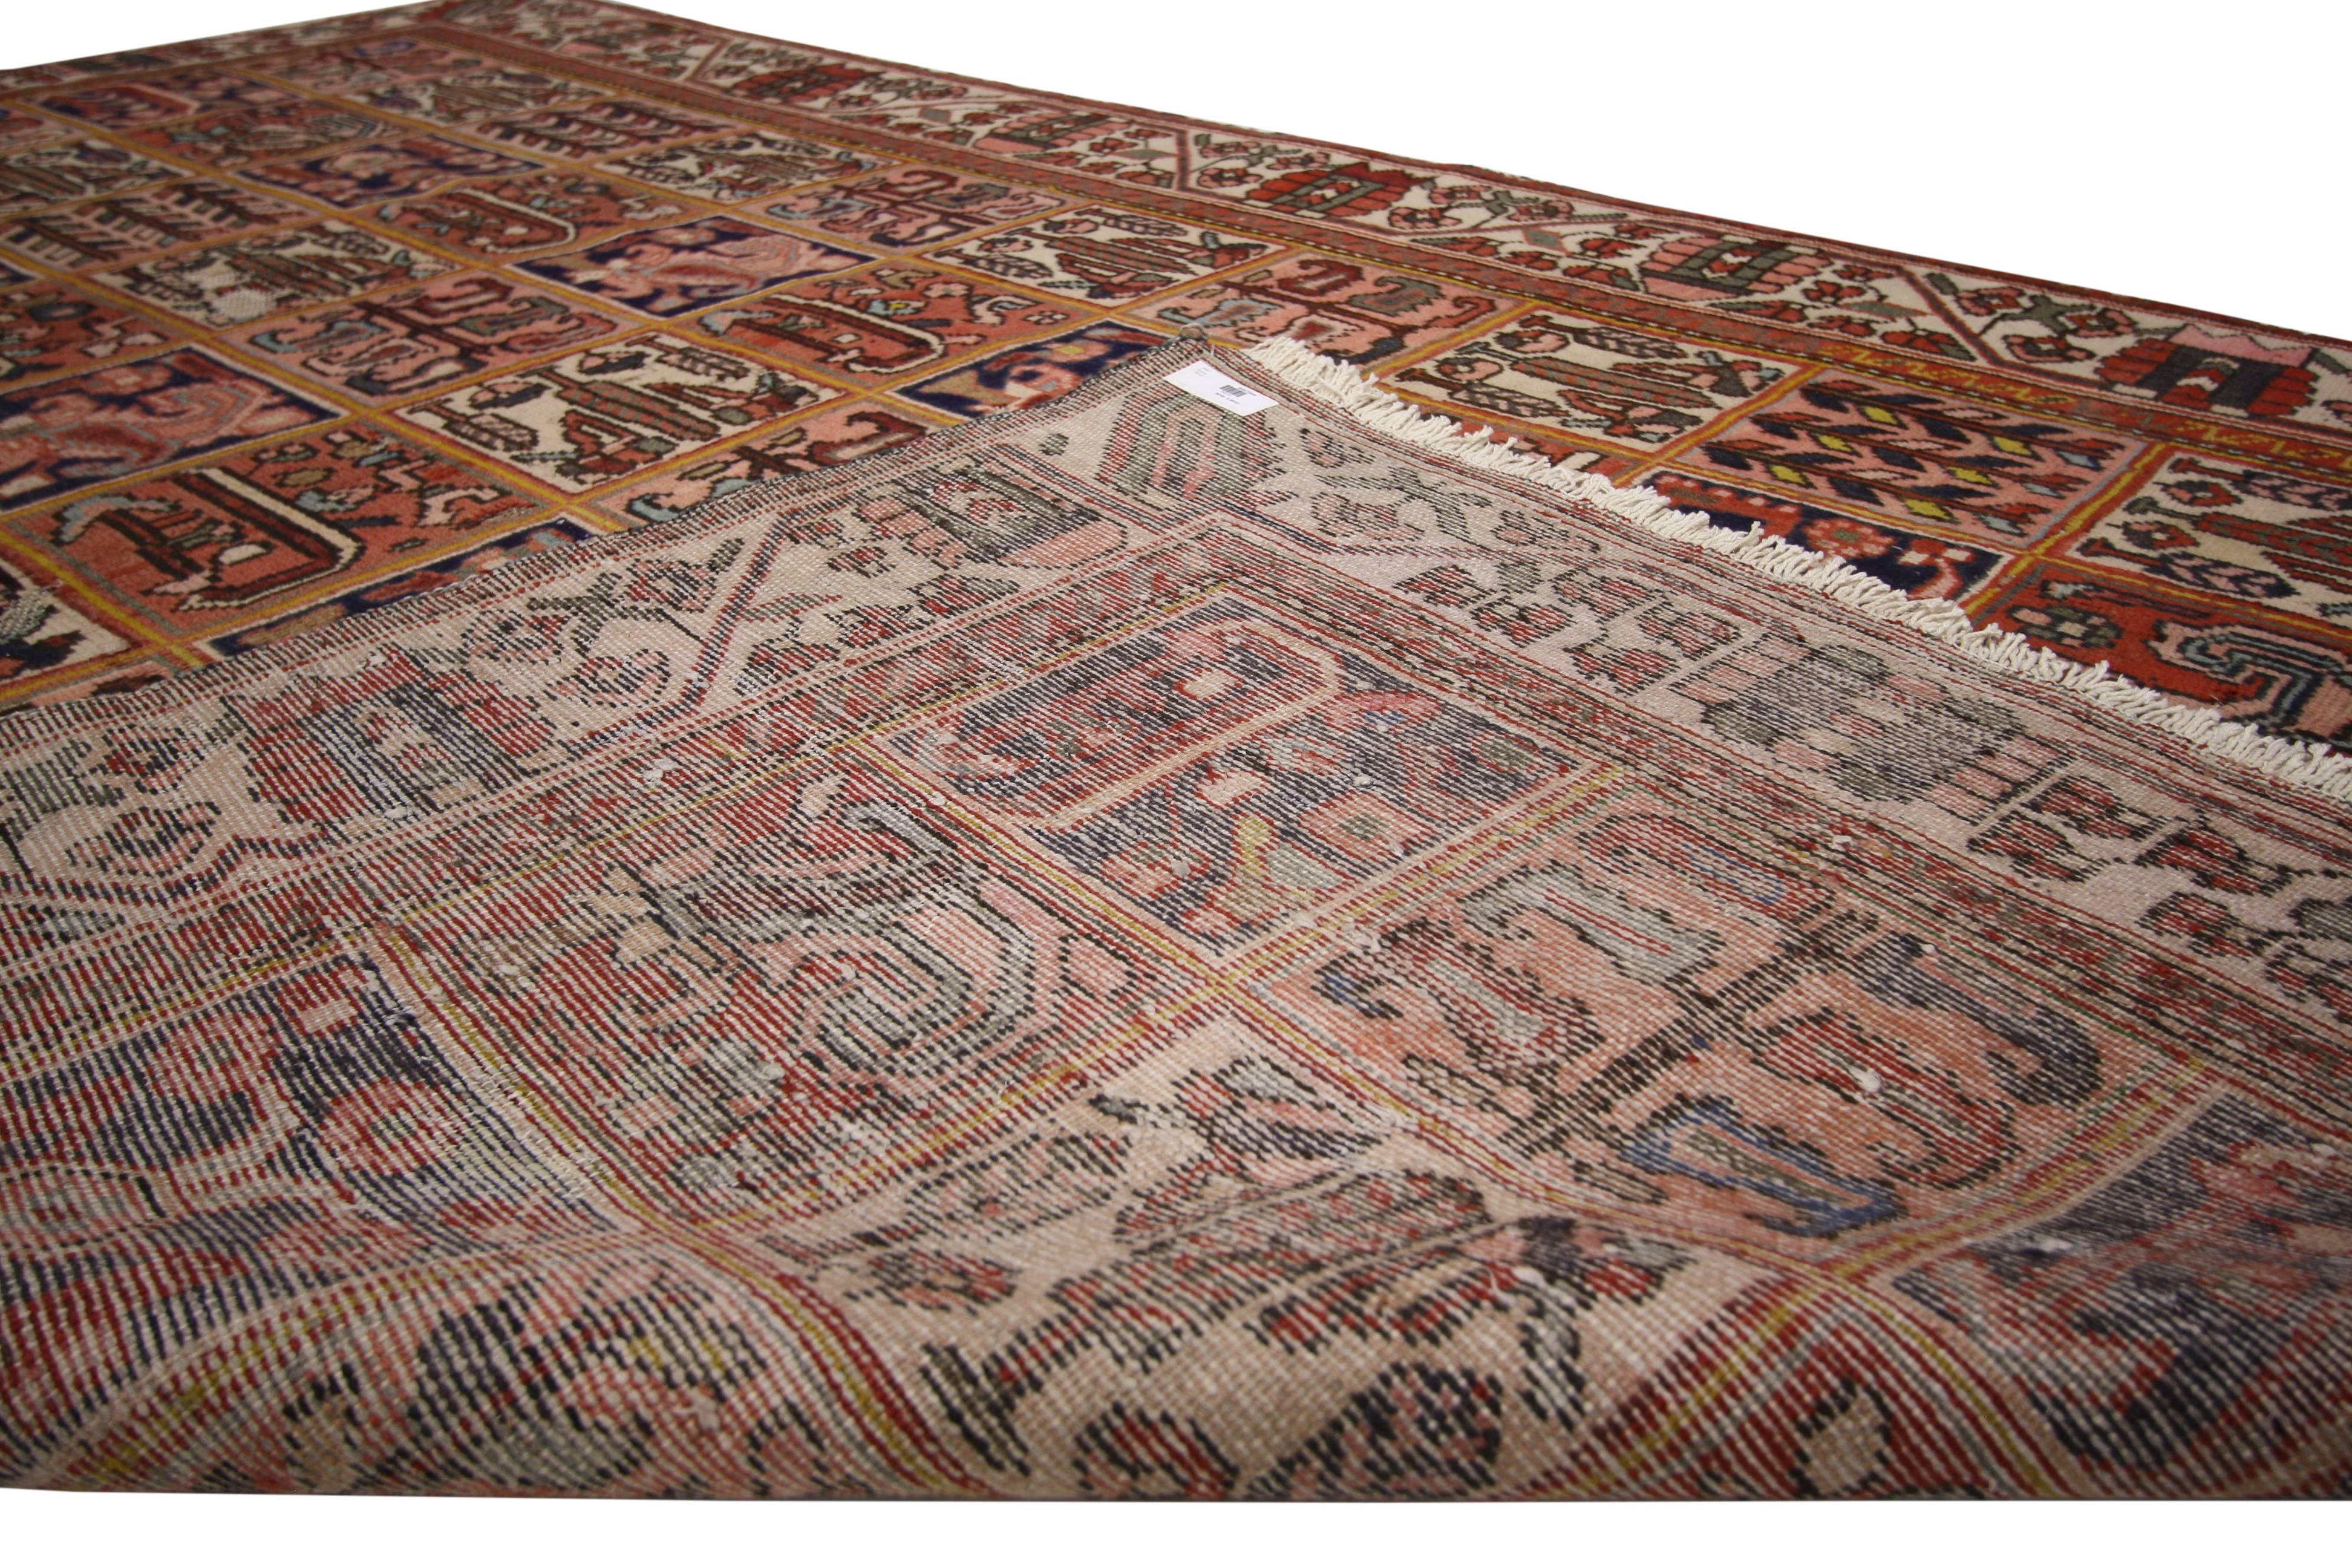 74579, vintage Persian Bakhtiari rug with Four Seasons garden design. This hand-knotted wool vintage Persian Bakhtiari rug features the Four Seasons design with a traditional modern style. Classically composed and boasting a truly magnificent Four